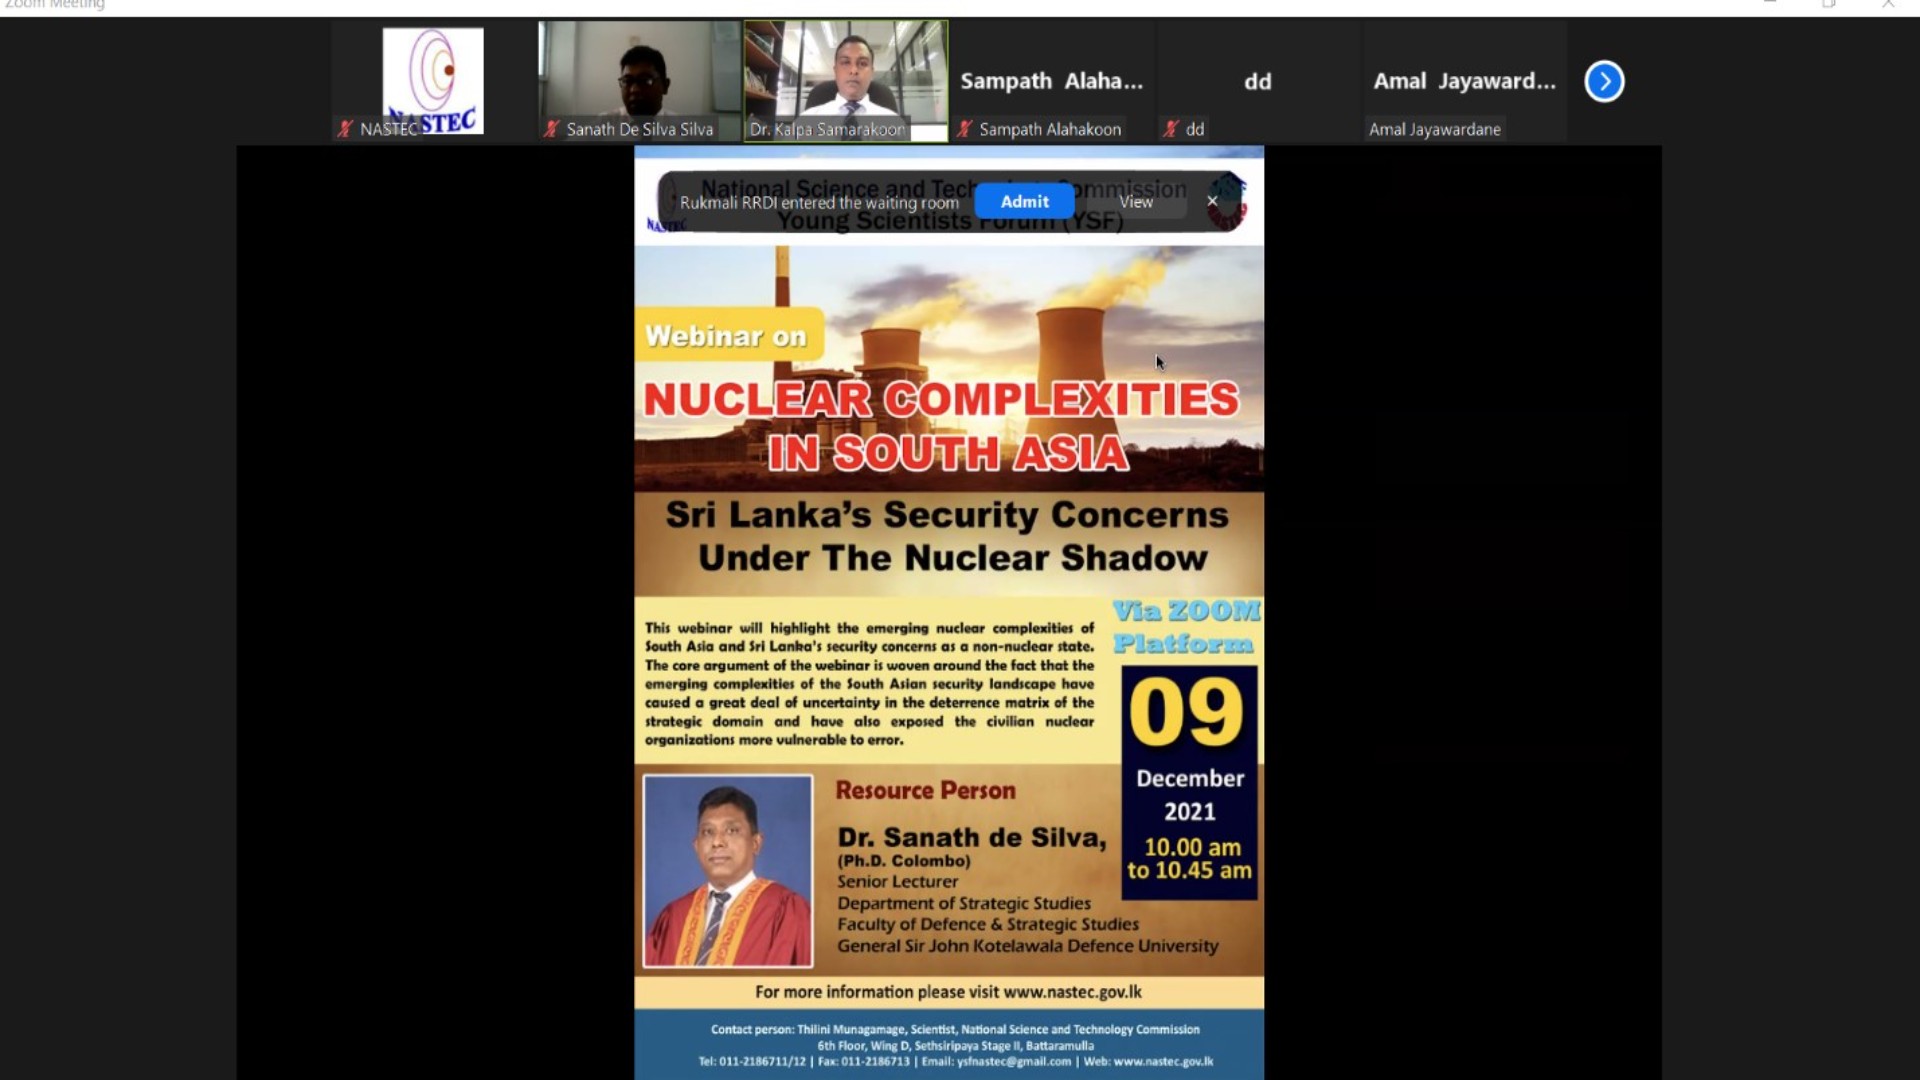 YSF Webinar on Nuclear Complexities in South Asia